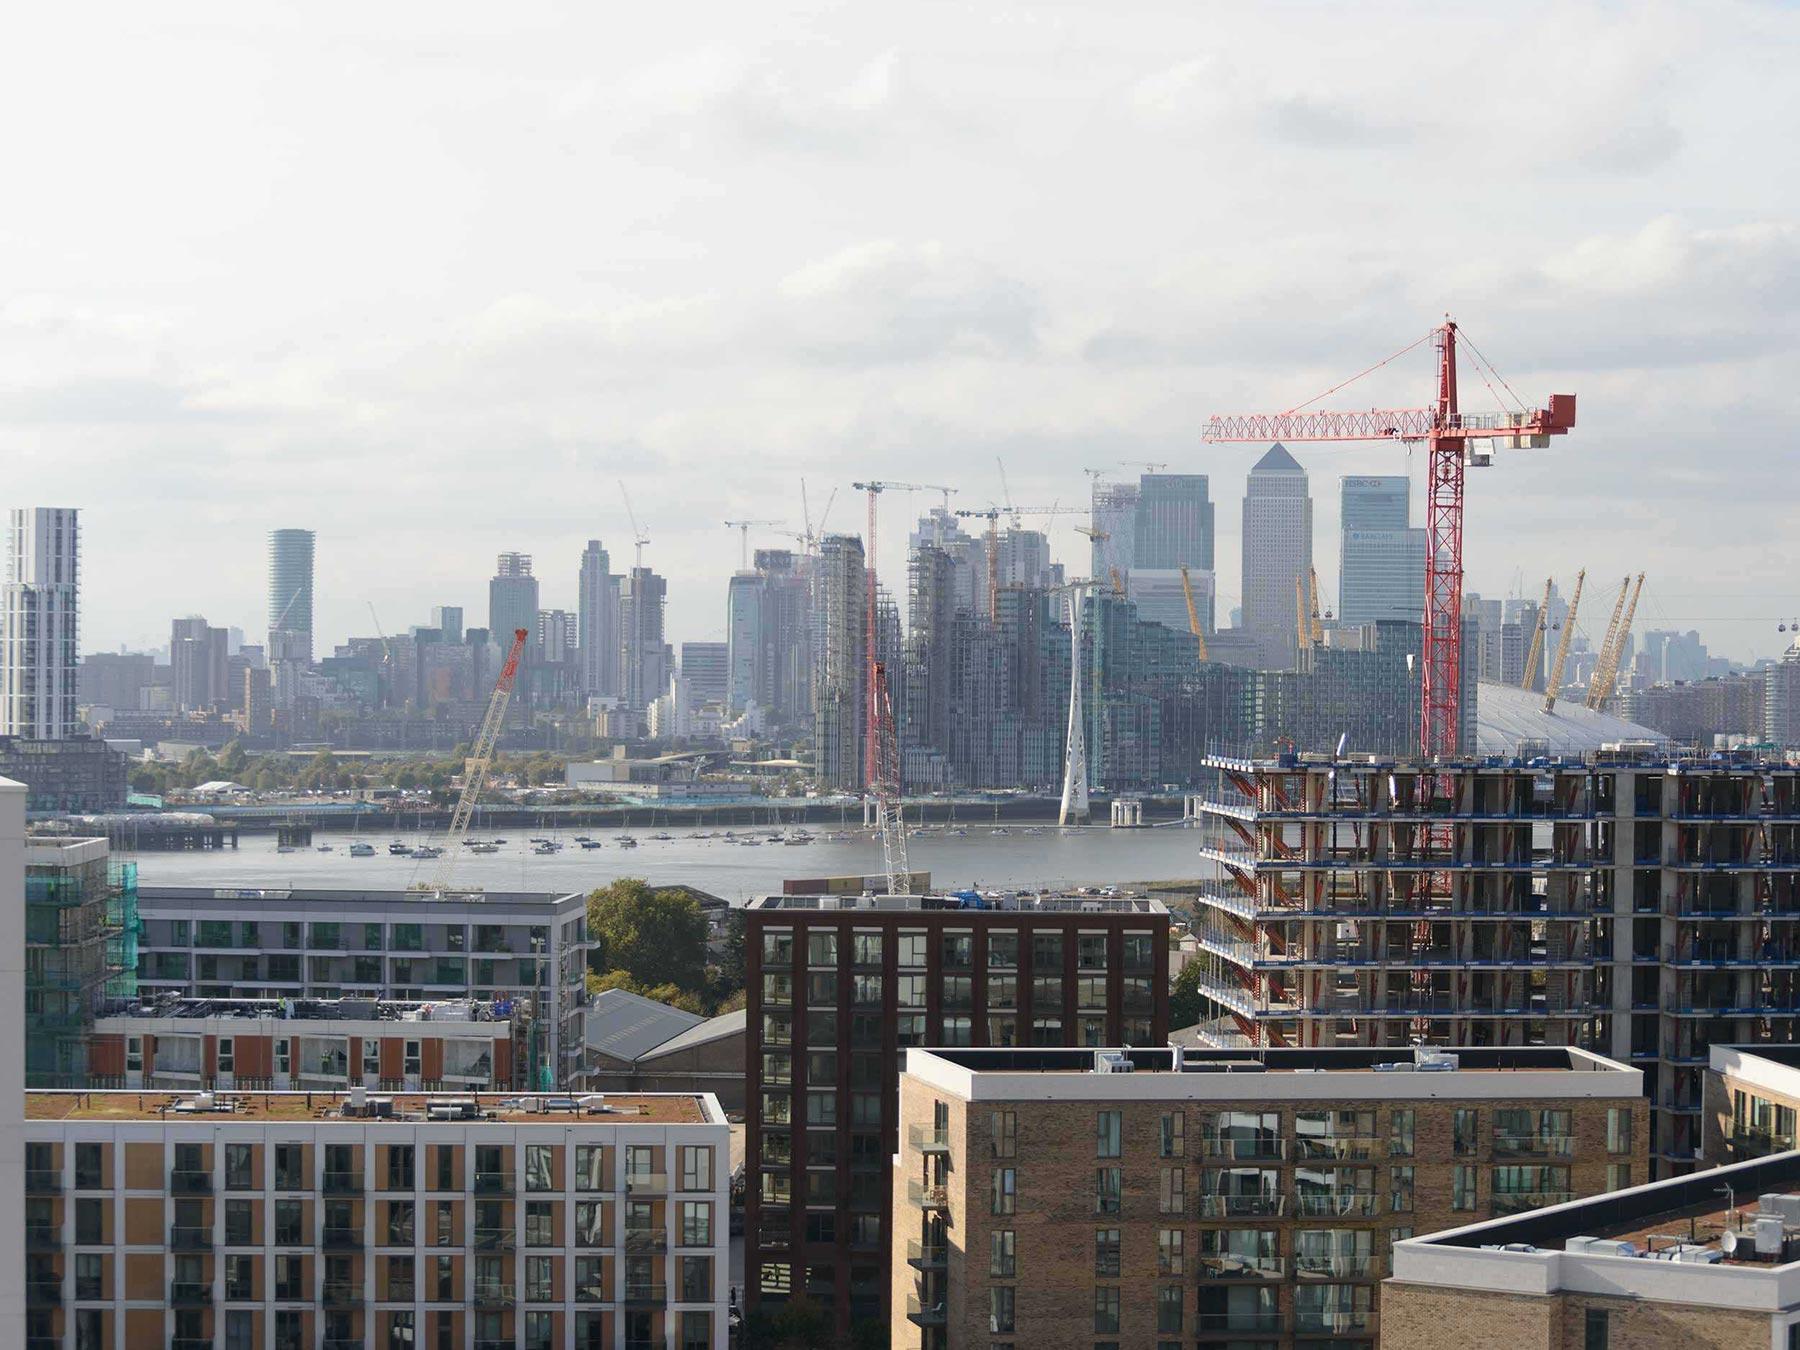 Modern day scene of buildings, cranes and the Canary Wharf skyline in the distance